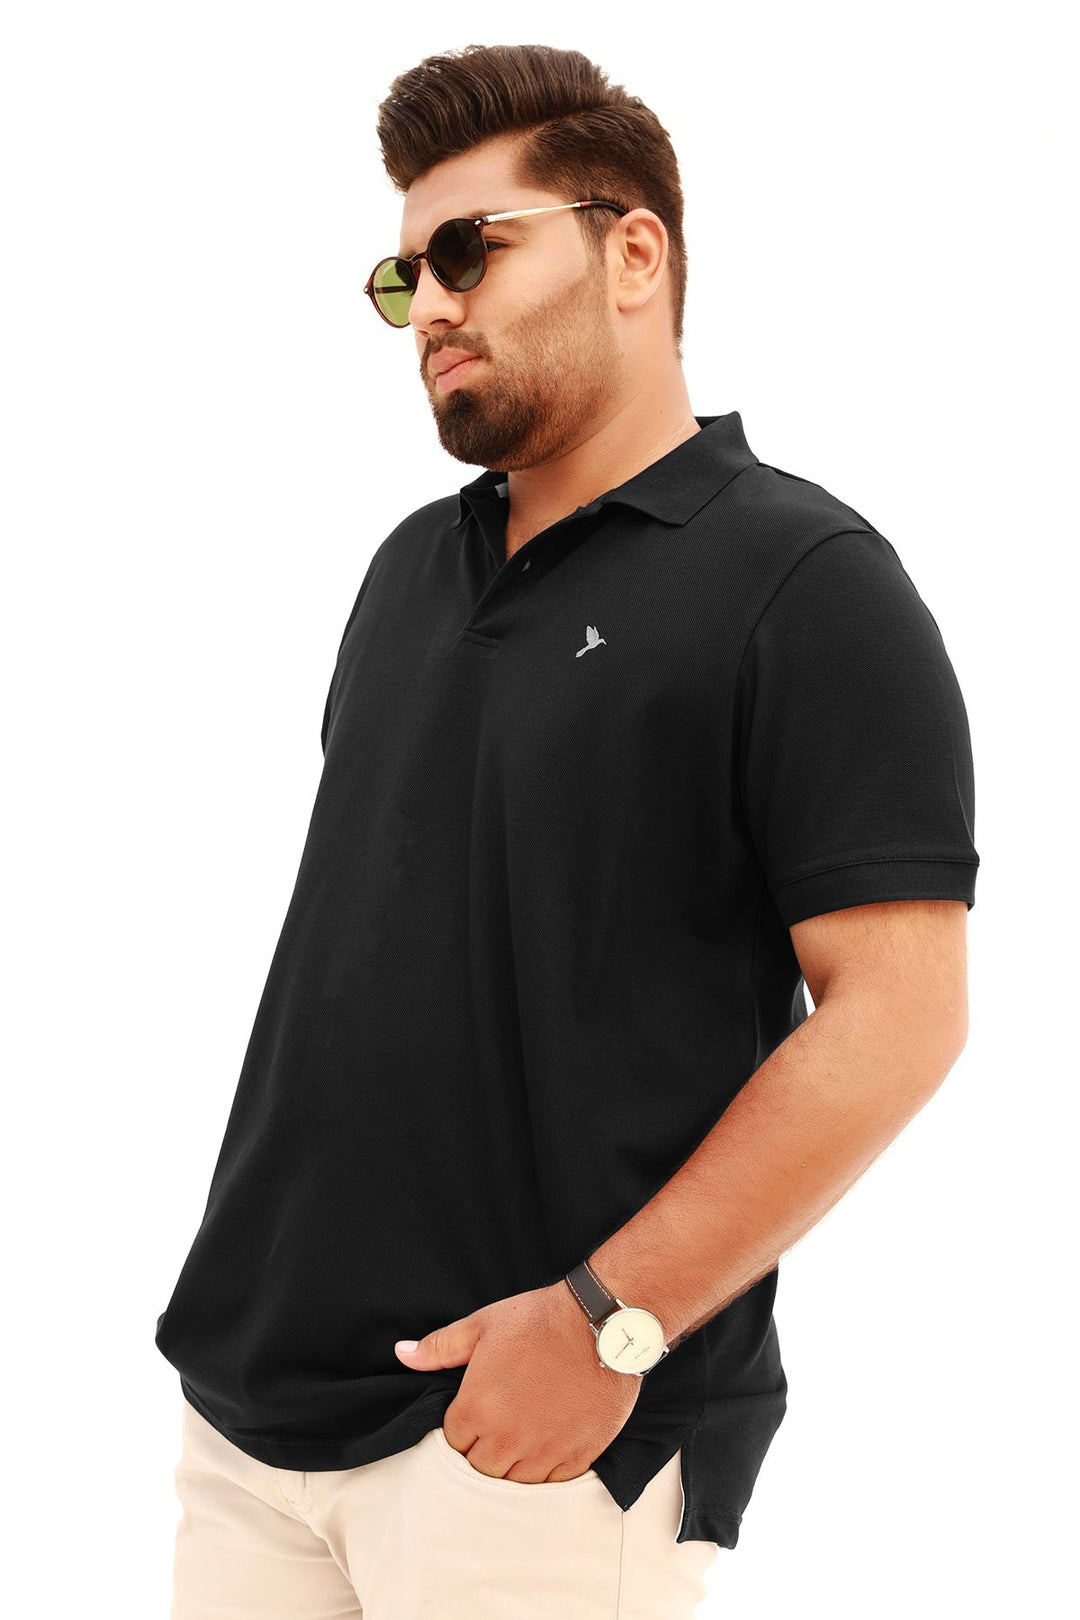 Pack of 3 Jet Black Embroidered Polo Shirt (Plus Size) - A23 - MP0400P